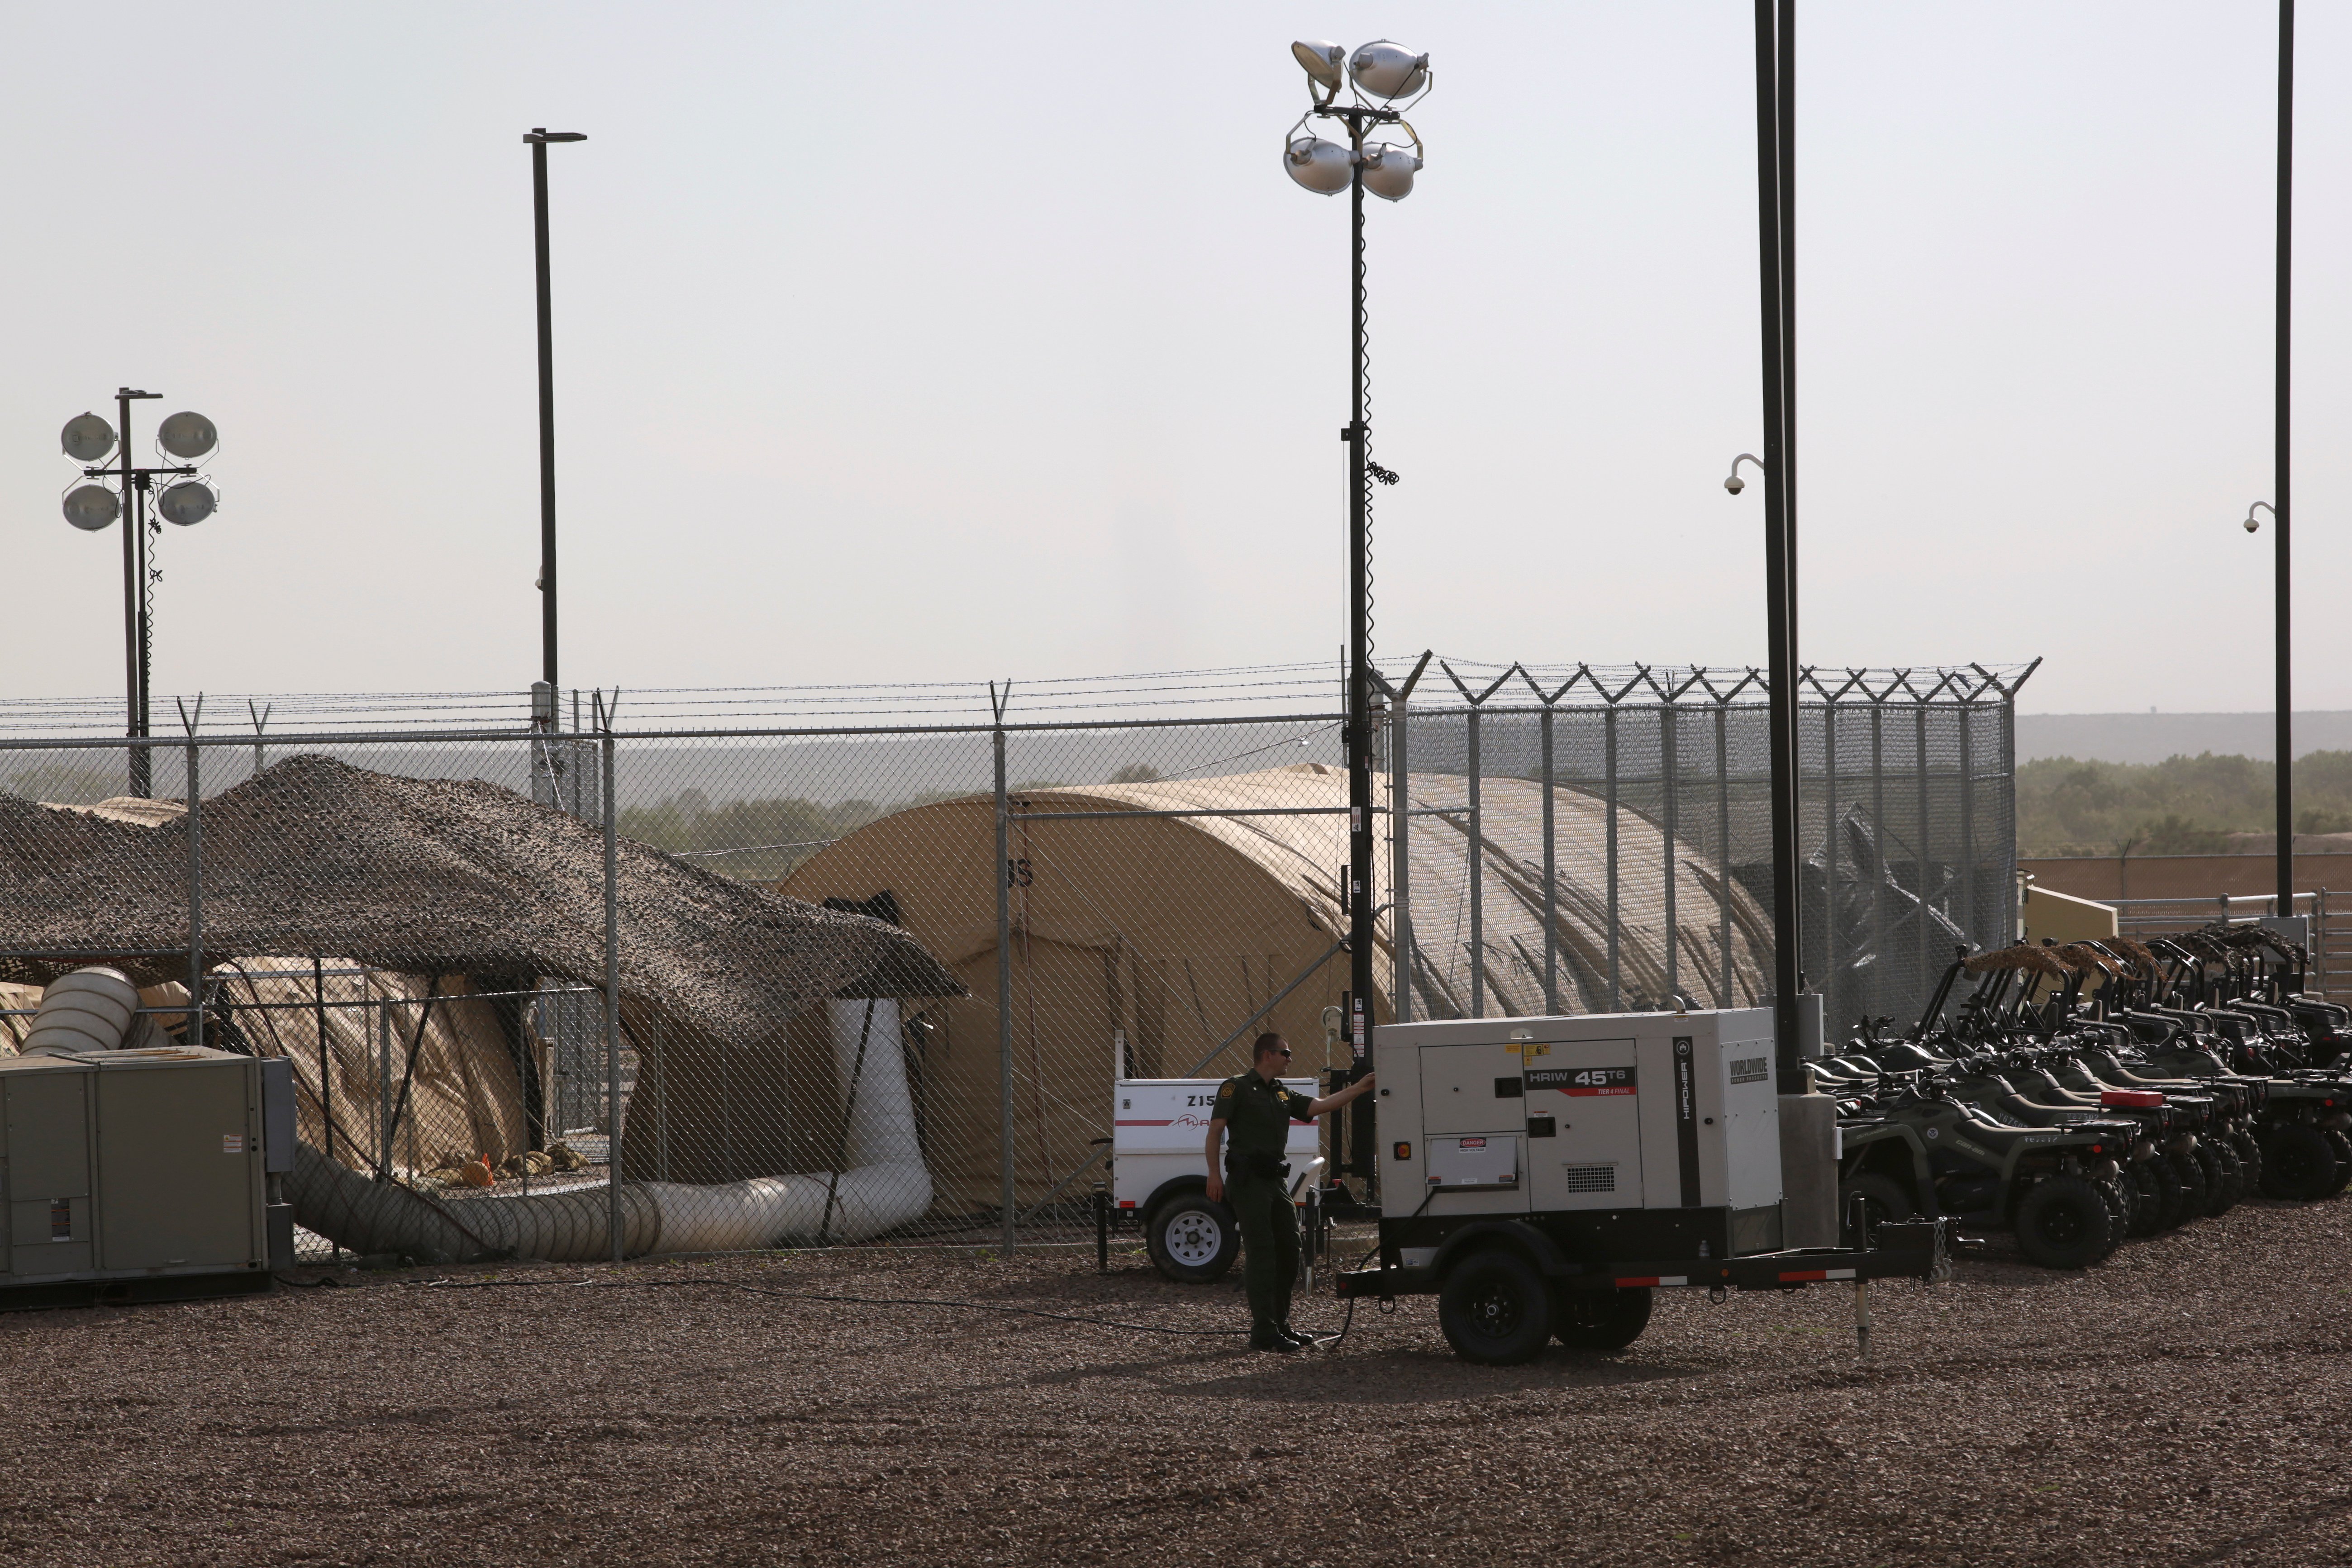 A general view shows the U.S. Customs and Border Protection's Border Patrol station facilities in Clint